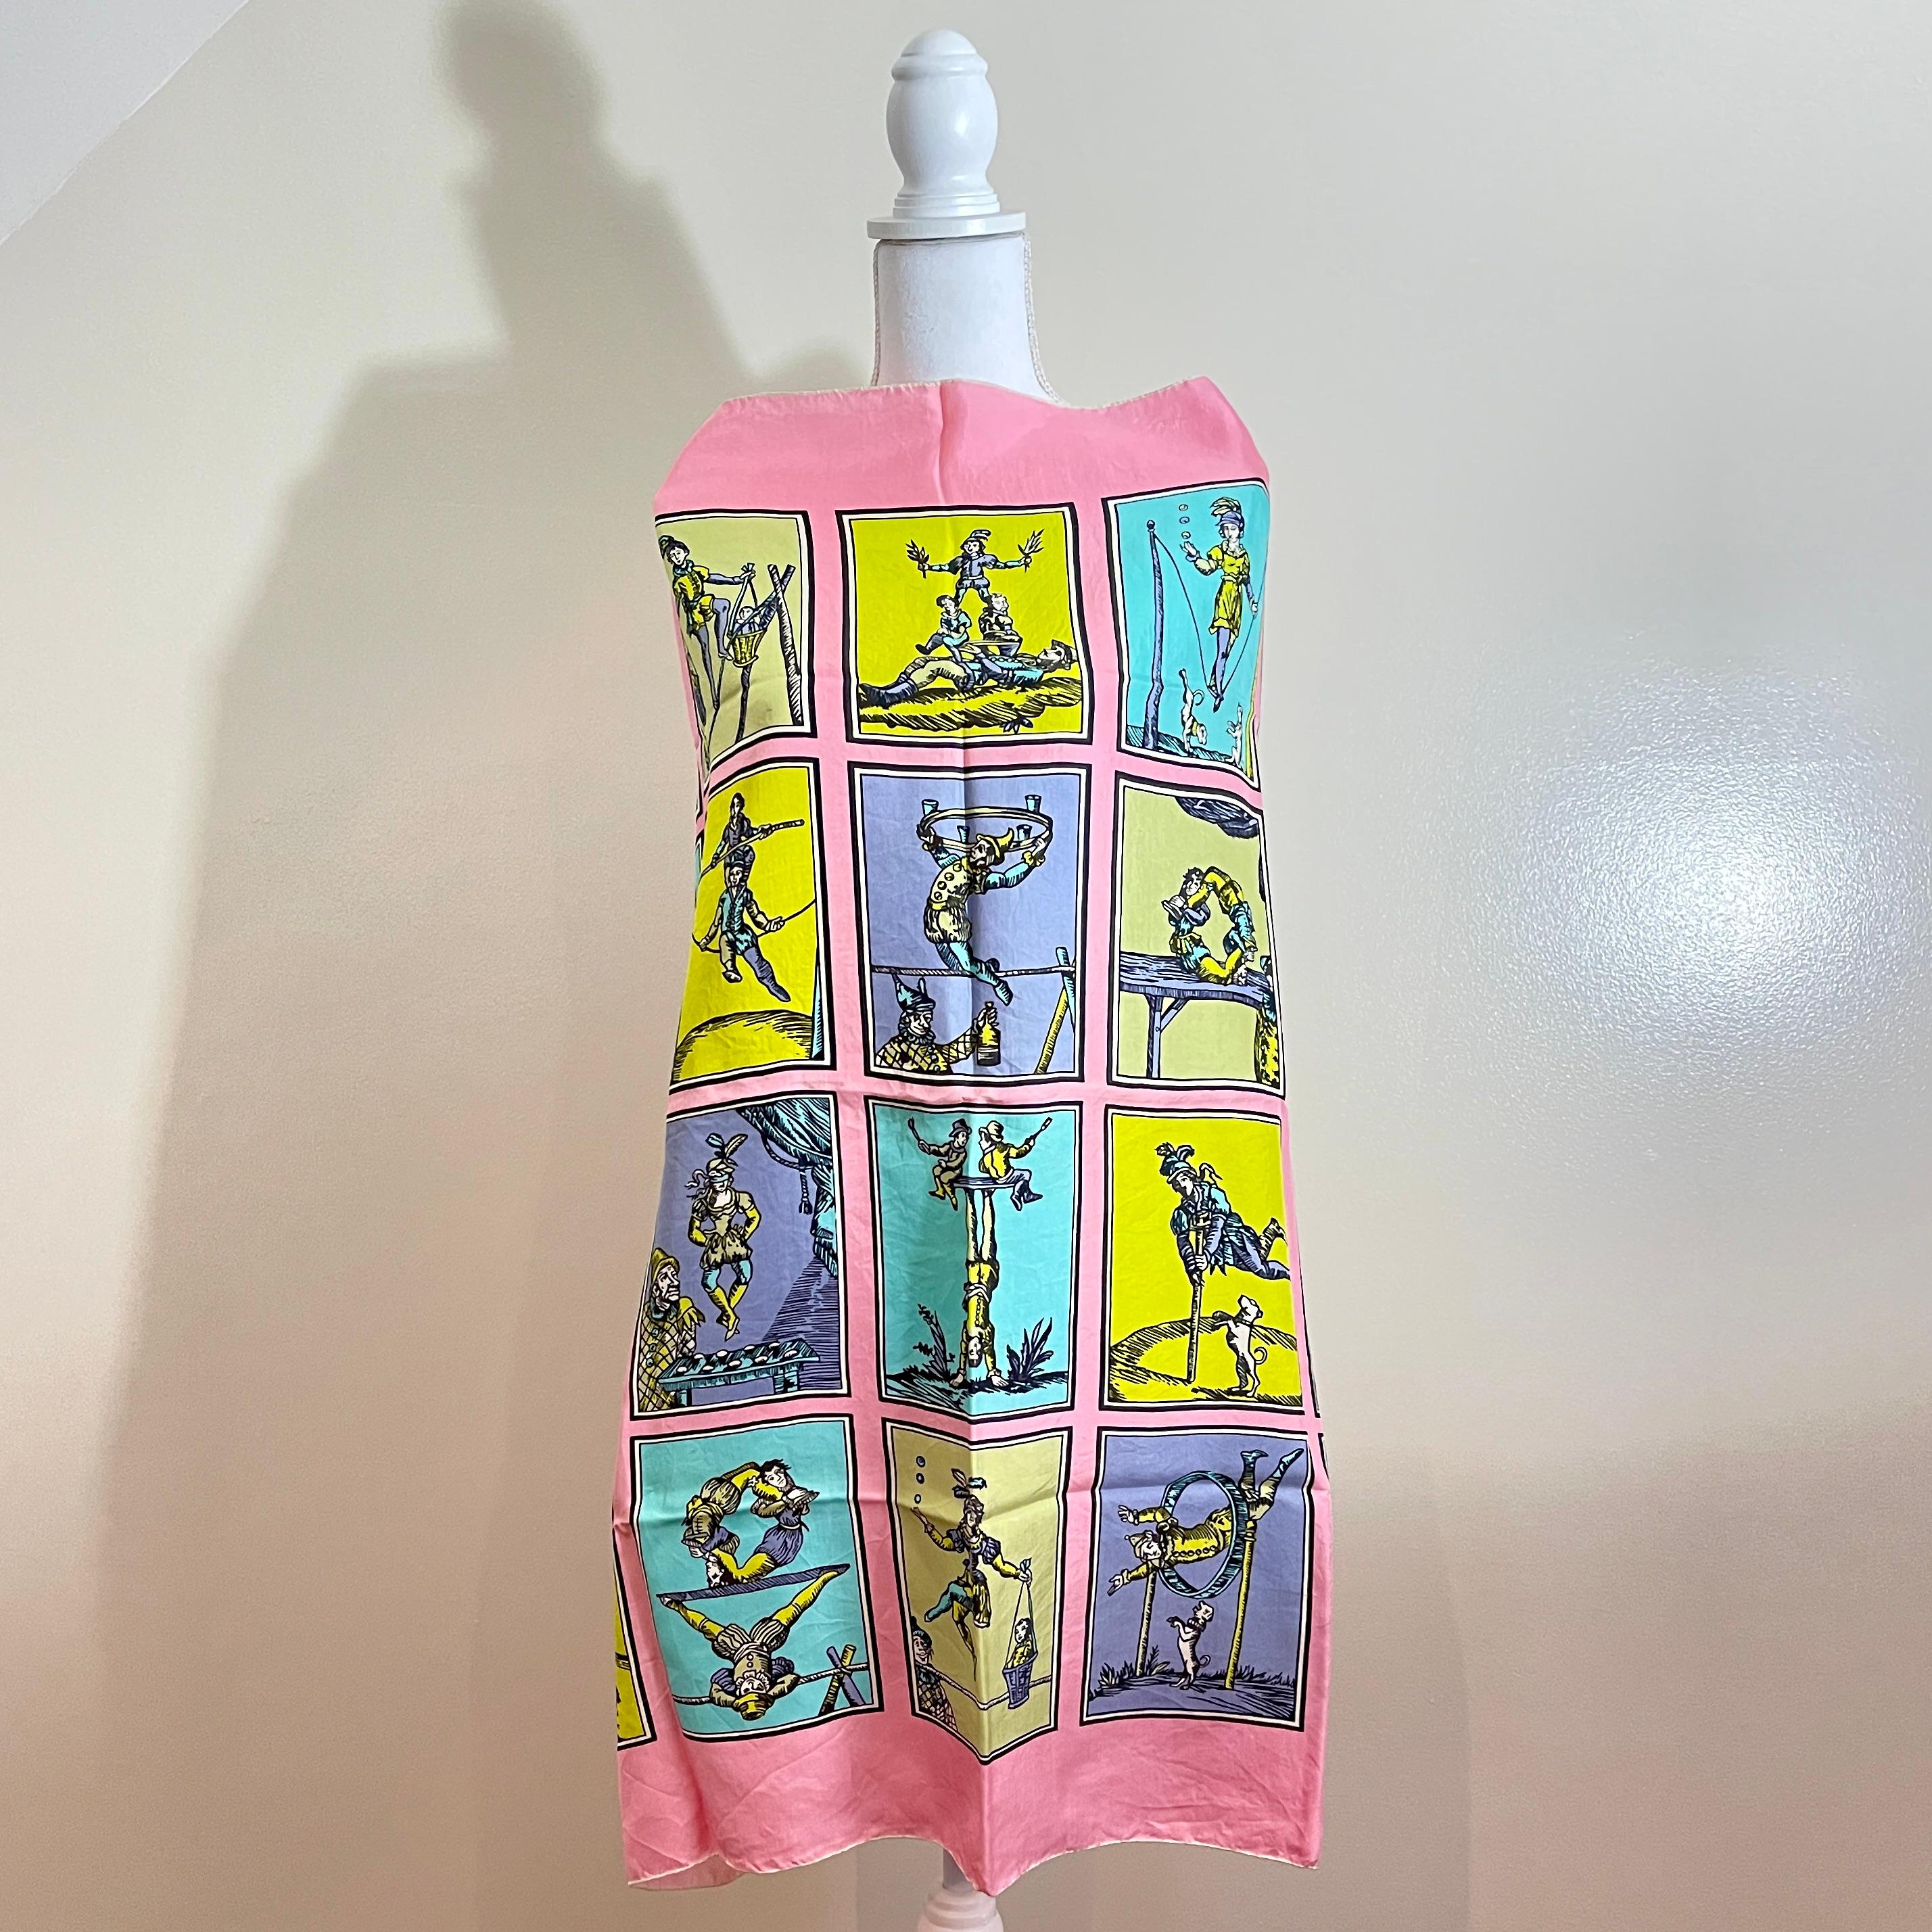 
Brooke Cadwallader Silk Scarf, The Carnival Print – 1947-1950

Brooke Cadwallader was a well-known printed textile designer of the mid-20th century. His whimsical prints drew on the interests of a country in and out of war and were used on scarves,